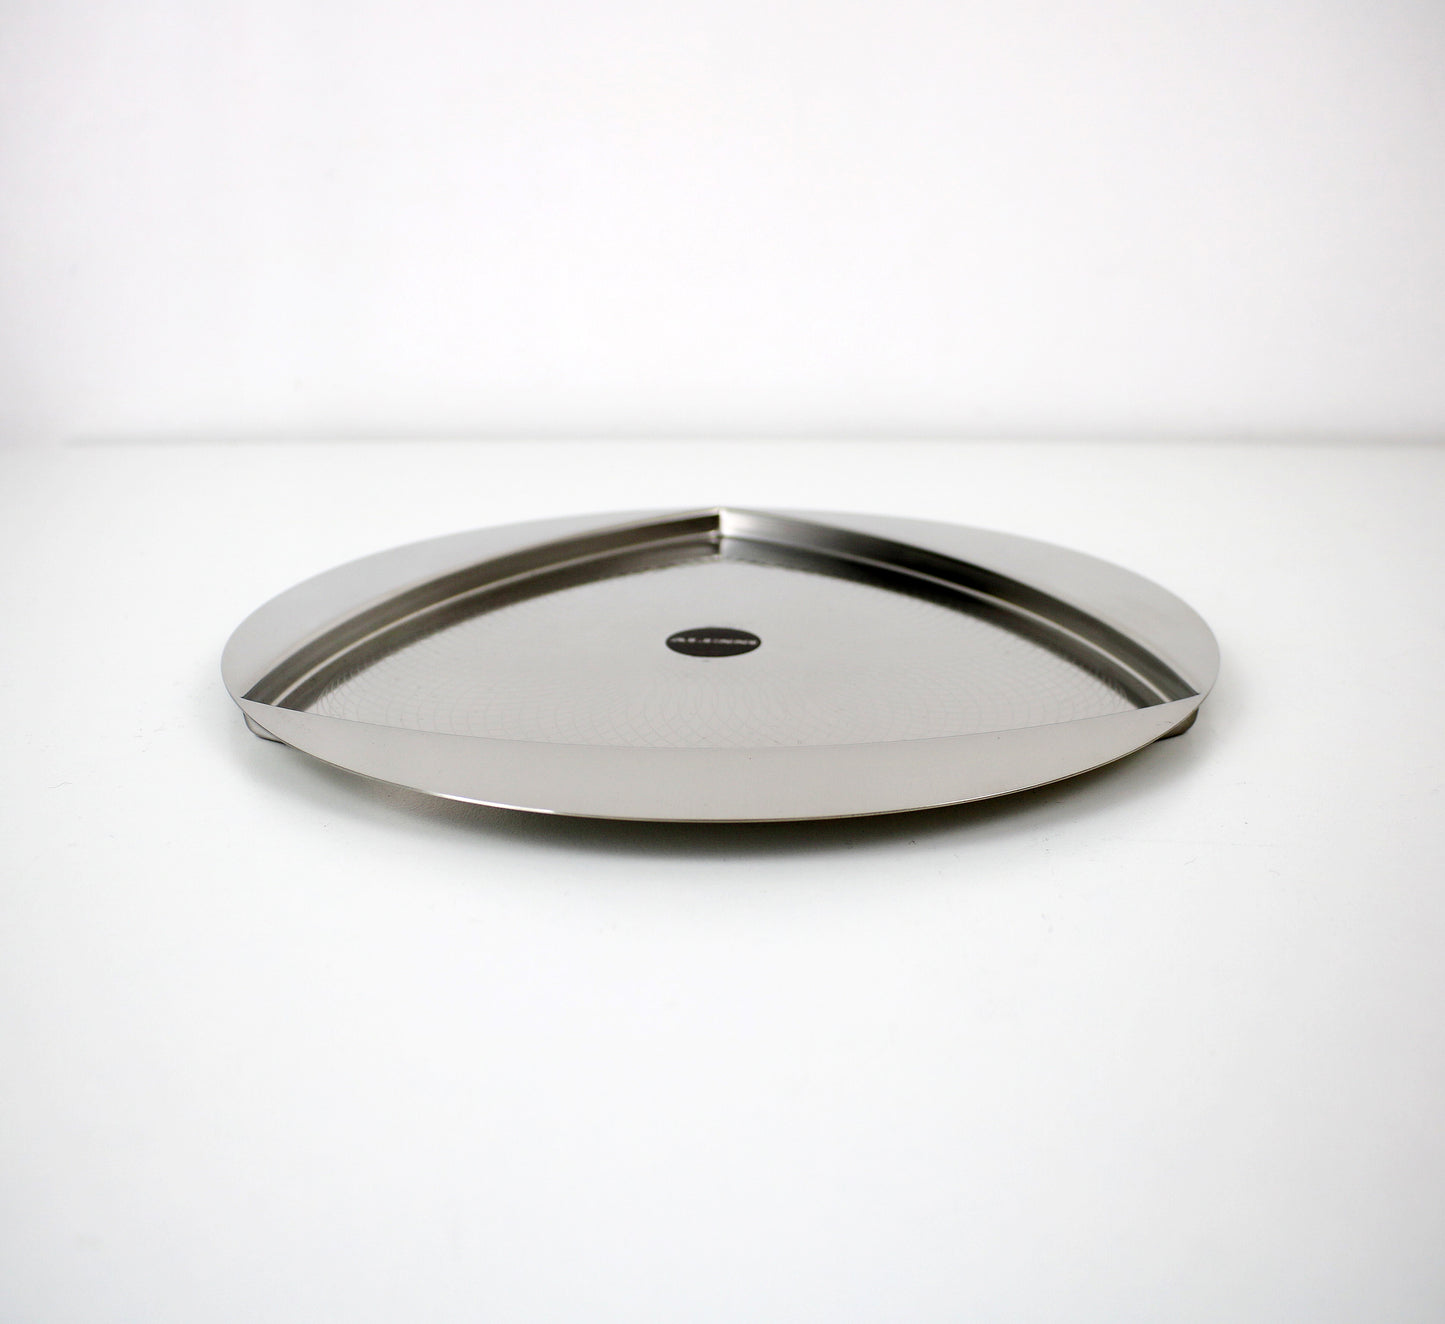 Alessi Trifolio tray in steel by Franco Grignani 1970s